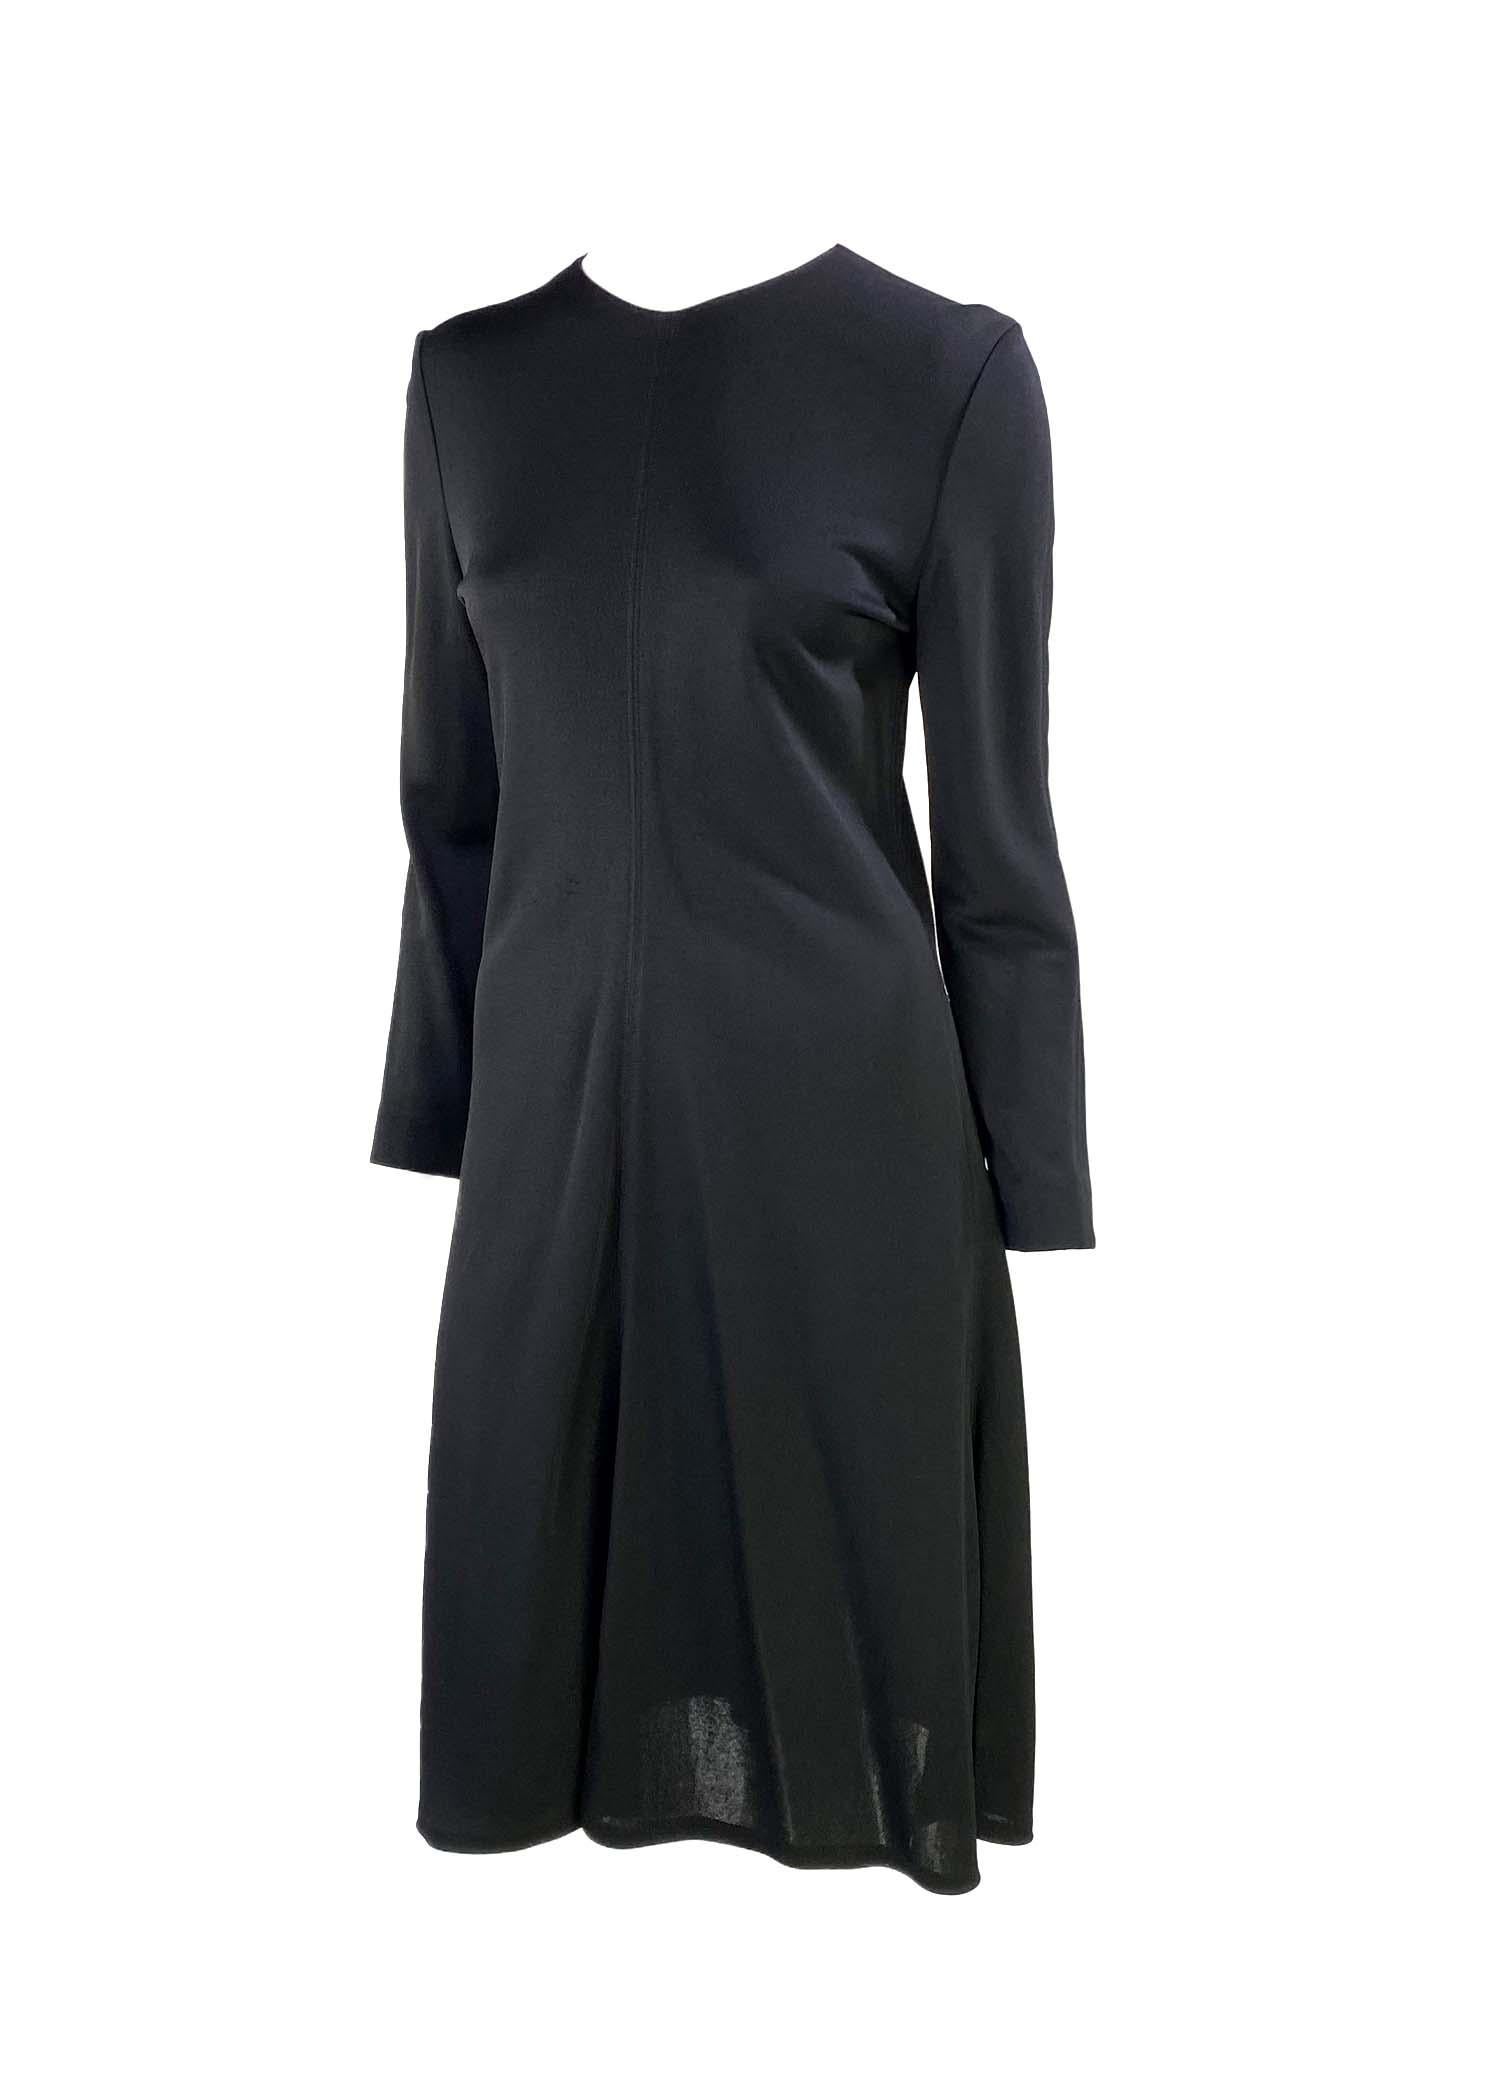 Presenting a little black Gucci dress, designed by Tom Ford. From the Fall/Winter 1995 collection, this simple and elegant long sleeve midi dress is constructed of viscose and features an a-line skirt shape. From one of Ford's earliest collections,